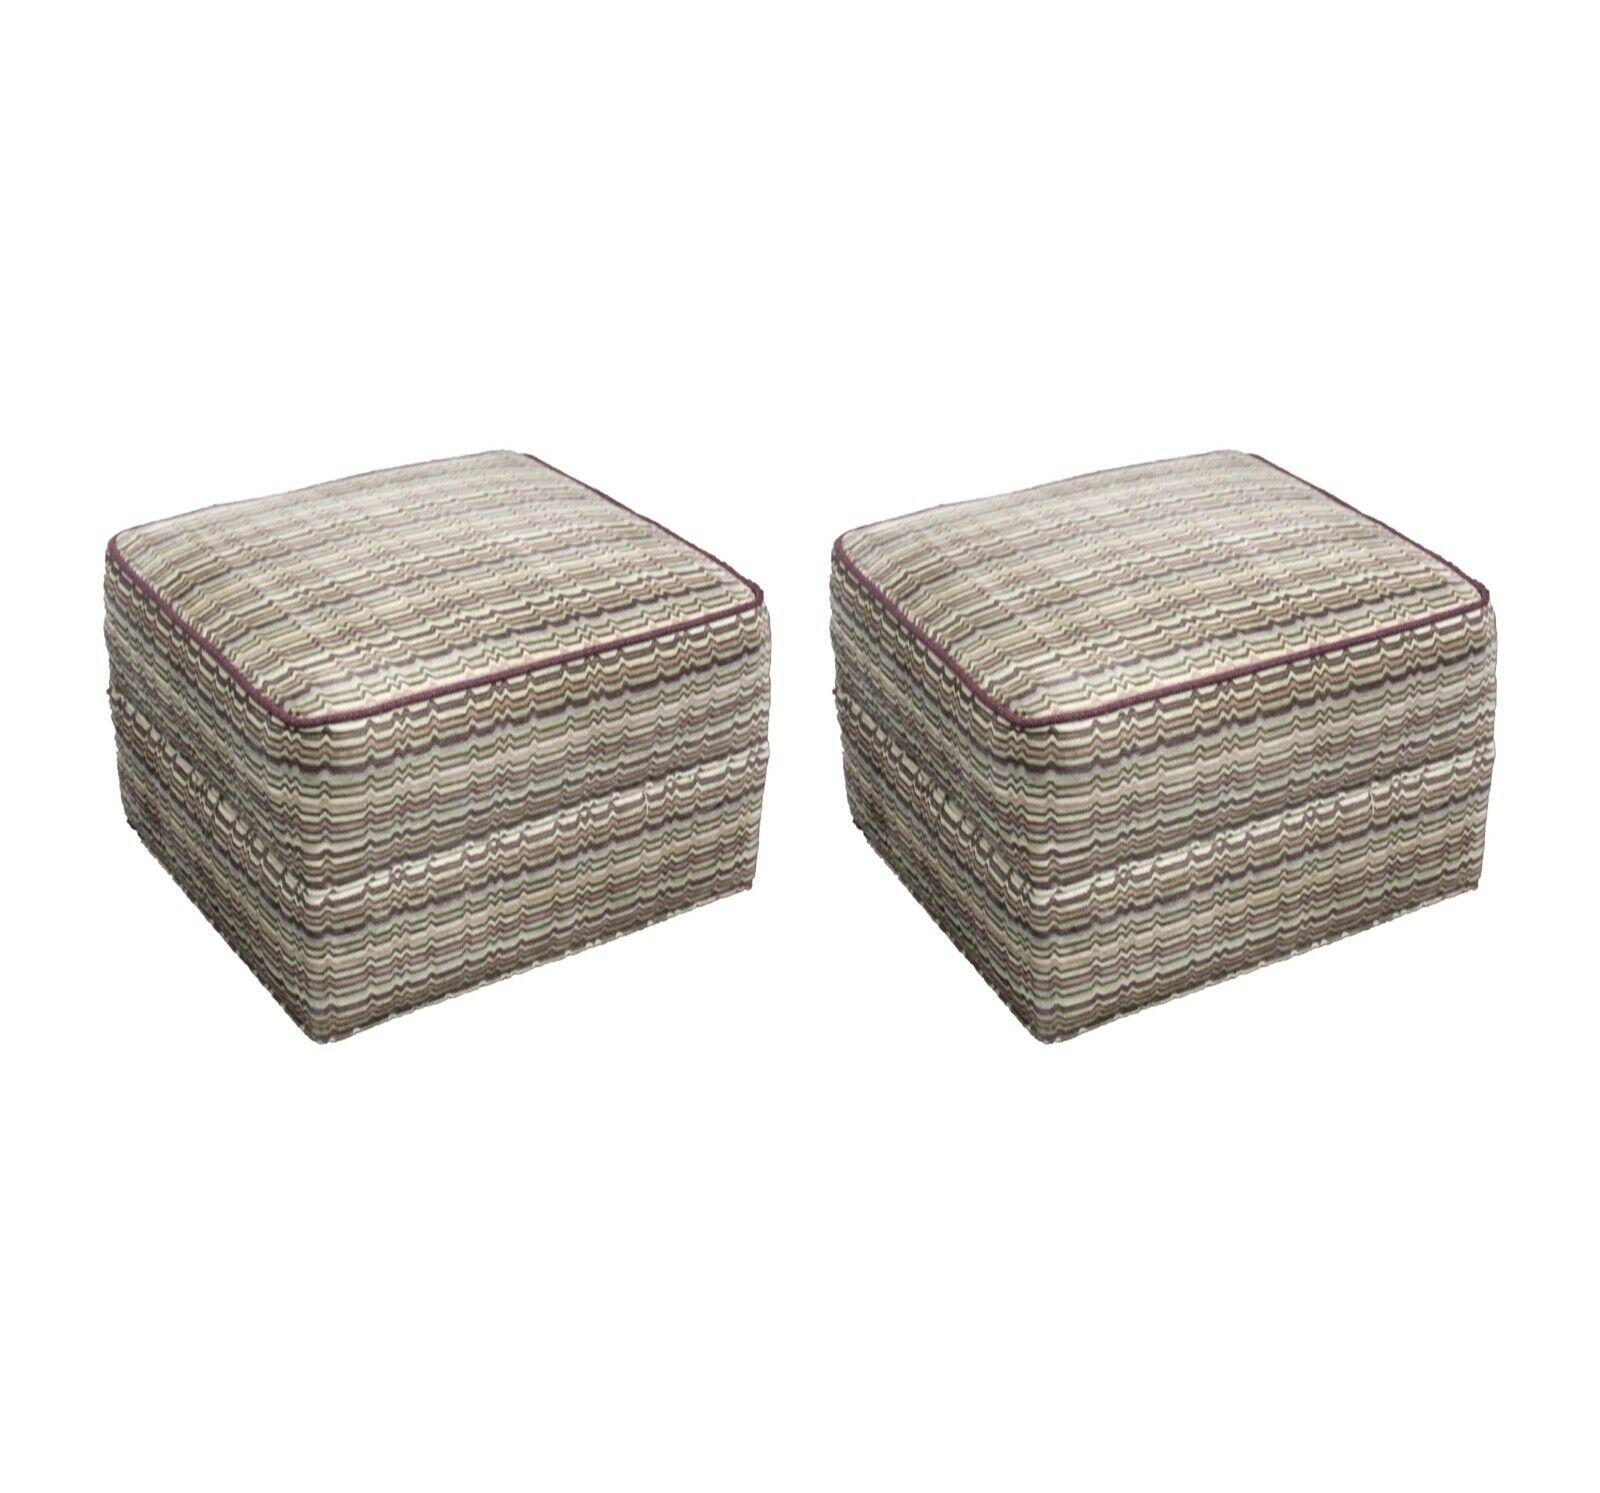 Vintage Pair of Baughman Style Ottomans Stools Poufs Chevron Purple Grey Pattern In Good Condition For Sale In Keego Harbor, MI